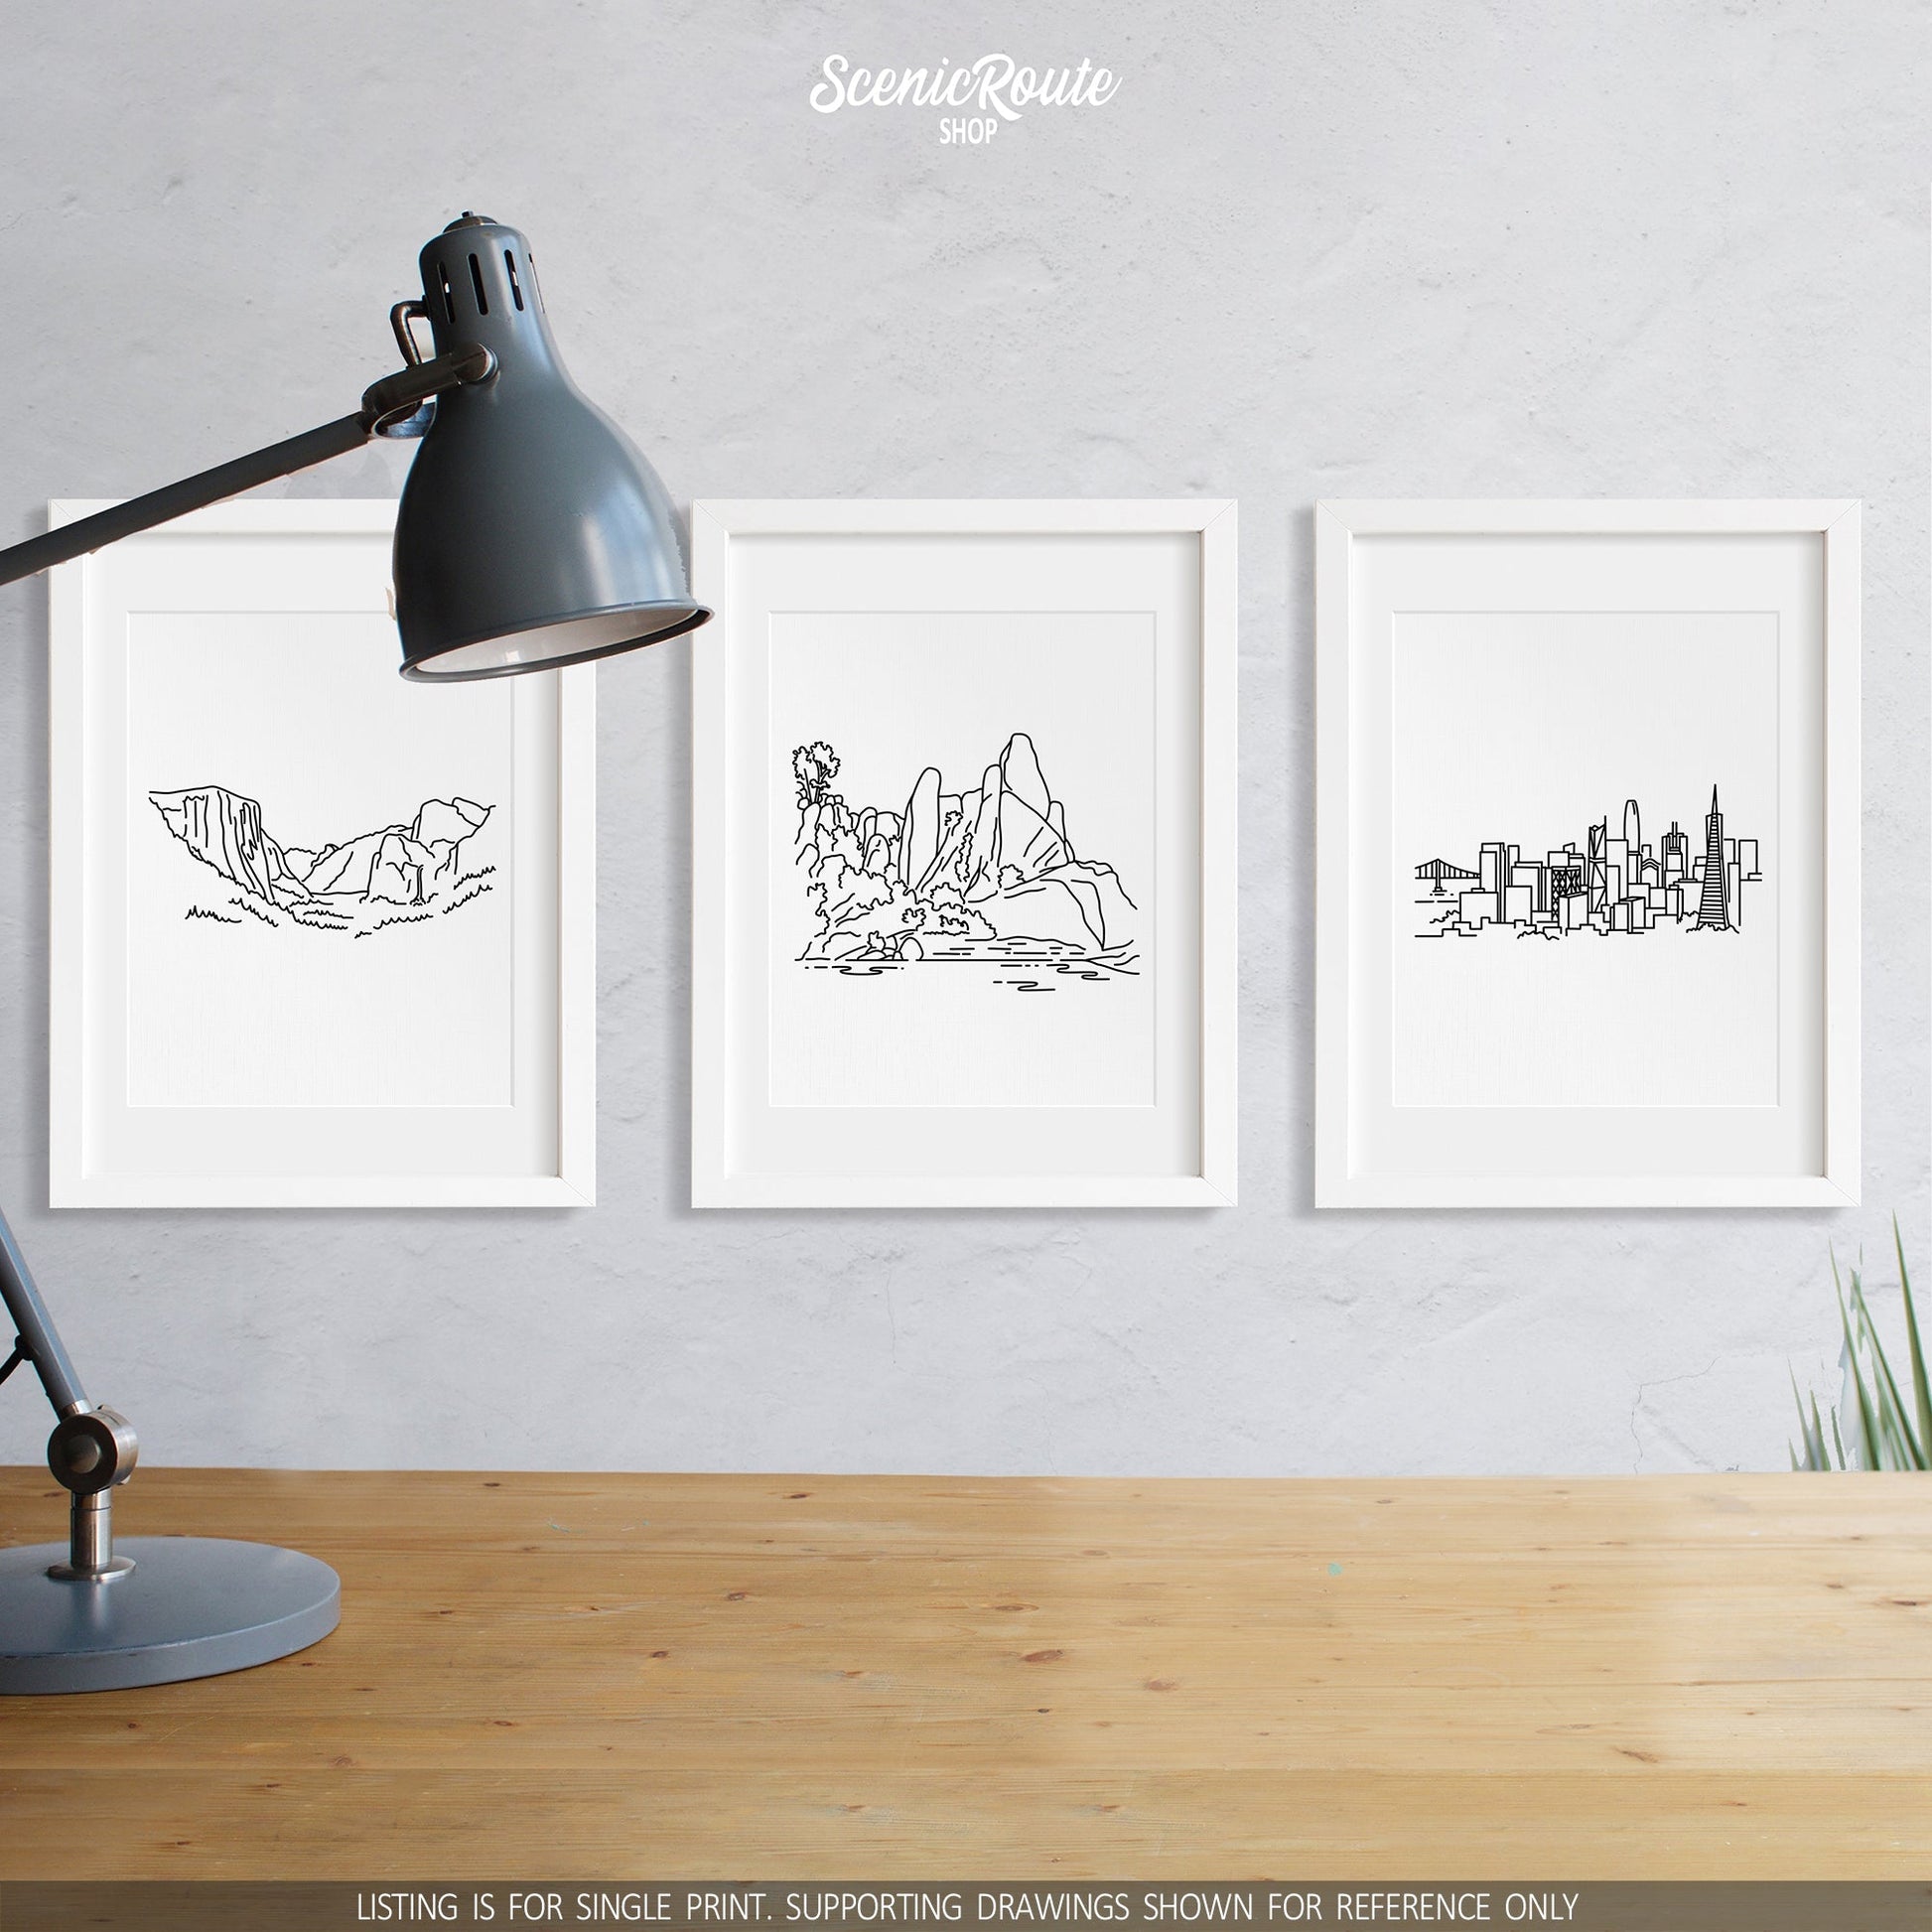 A group of three framed drawings on a wall above a desk with a lamp. The line art drawings include Yosemite National Park, Pinnacles National Park, and the San Francisco Skyline